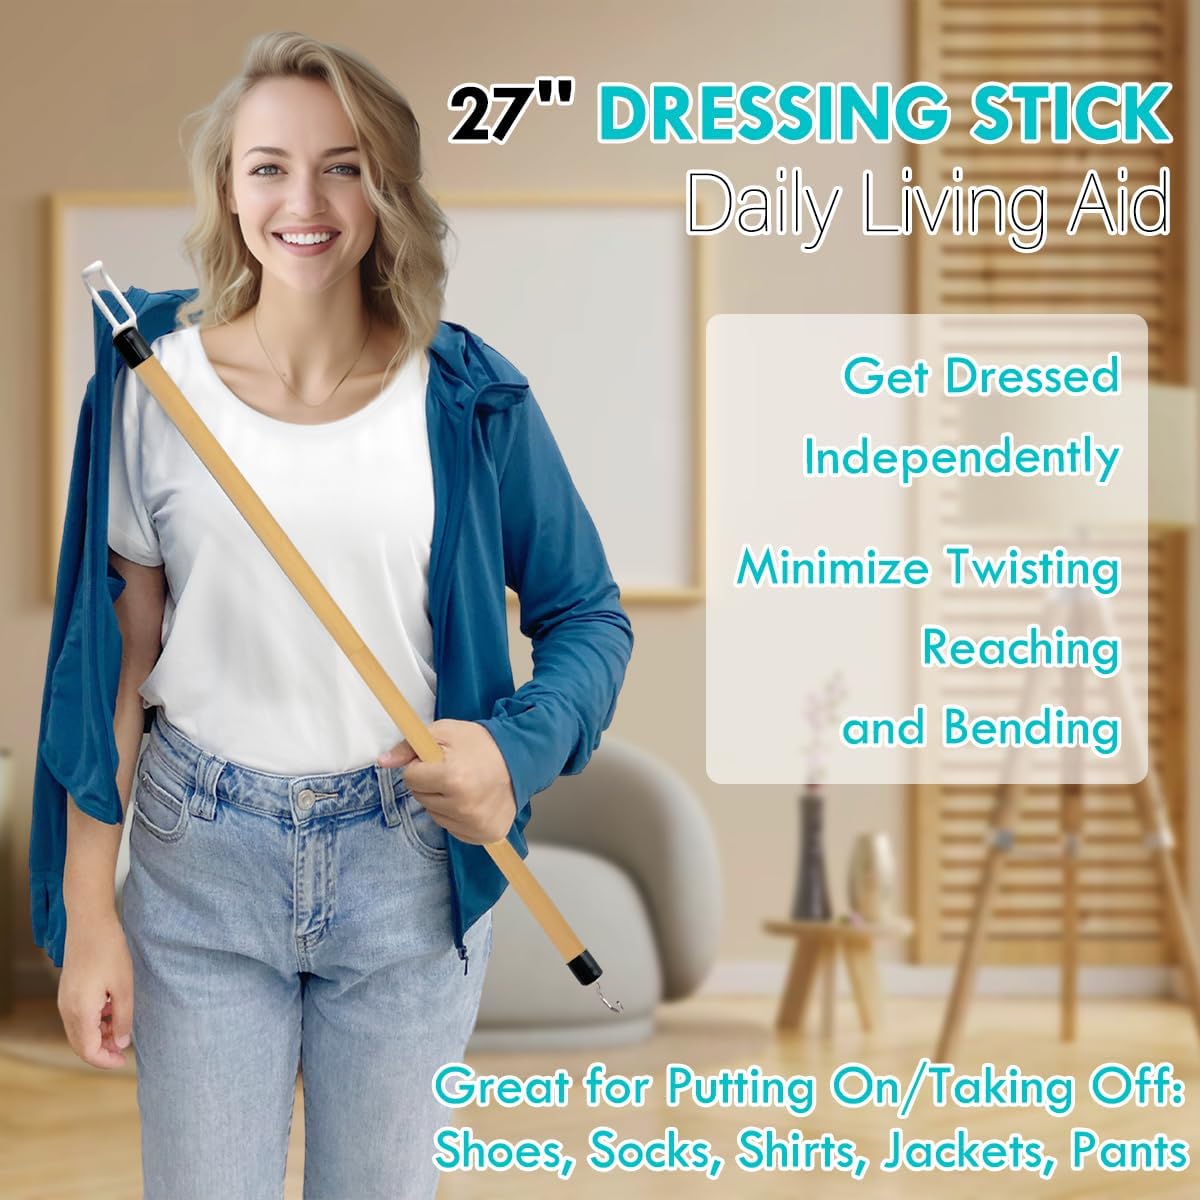 27'' Dressing Stick, Long Dressing Stick for Elderly, Disabled, Limited Mobility – Daily Living Dressing Aid Stick for Hip Replacement, Back, Shoulder Surgery - Dressing Aid for Pants, Shoes, Socks